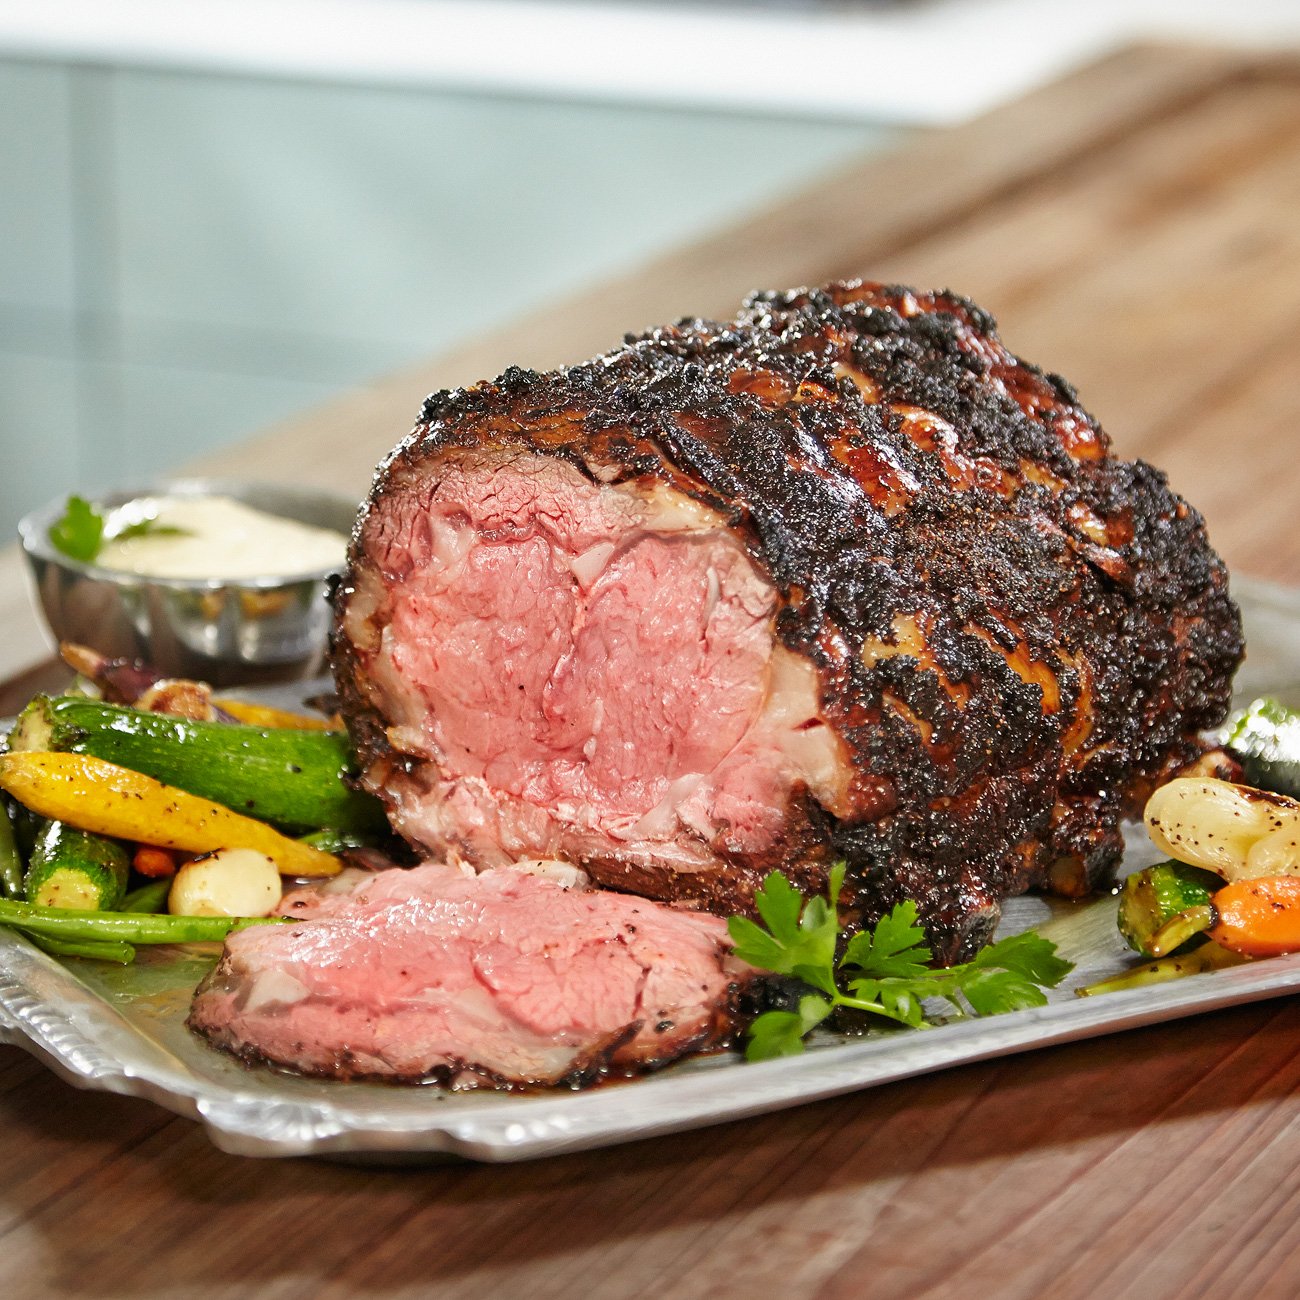 https://images.heb.com/is/image/HEBGrocery/Test/garlic-and-mustard-crusted-prime-rib-roast-recipe.jpg